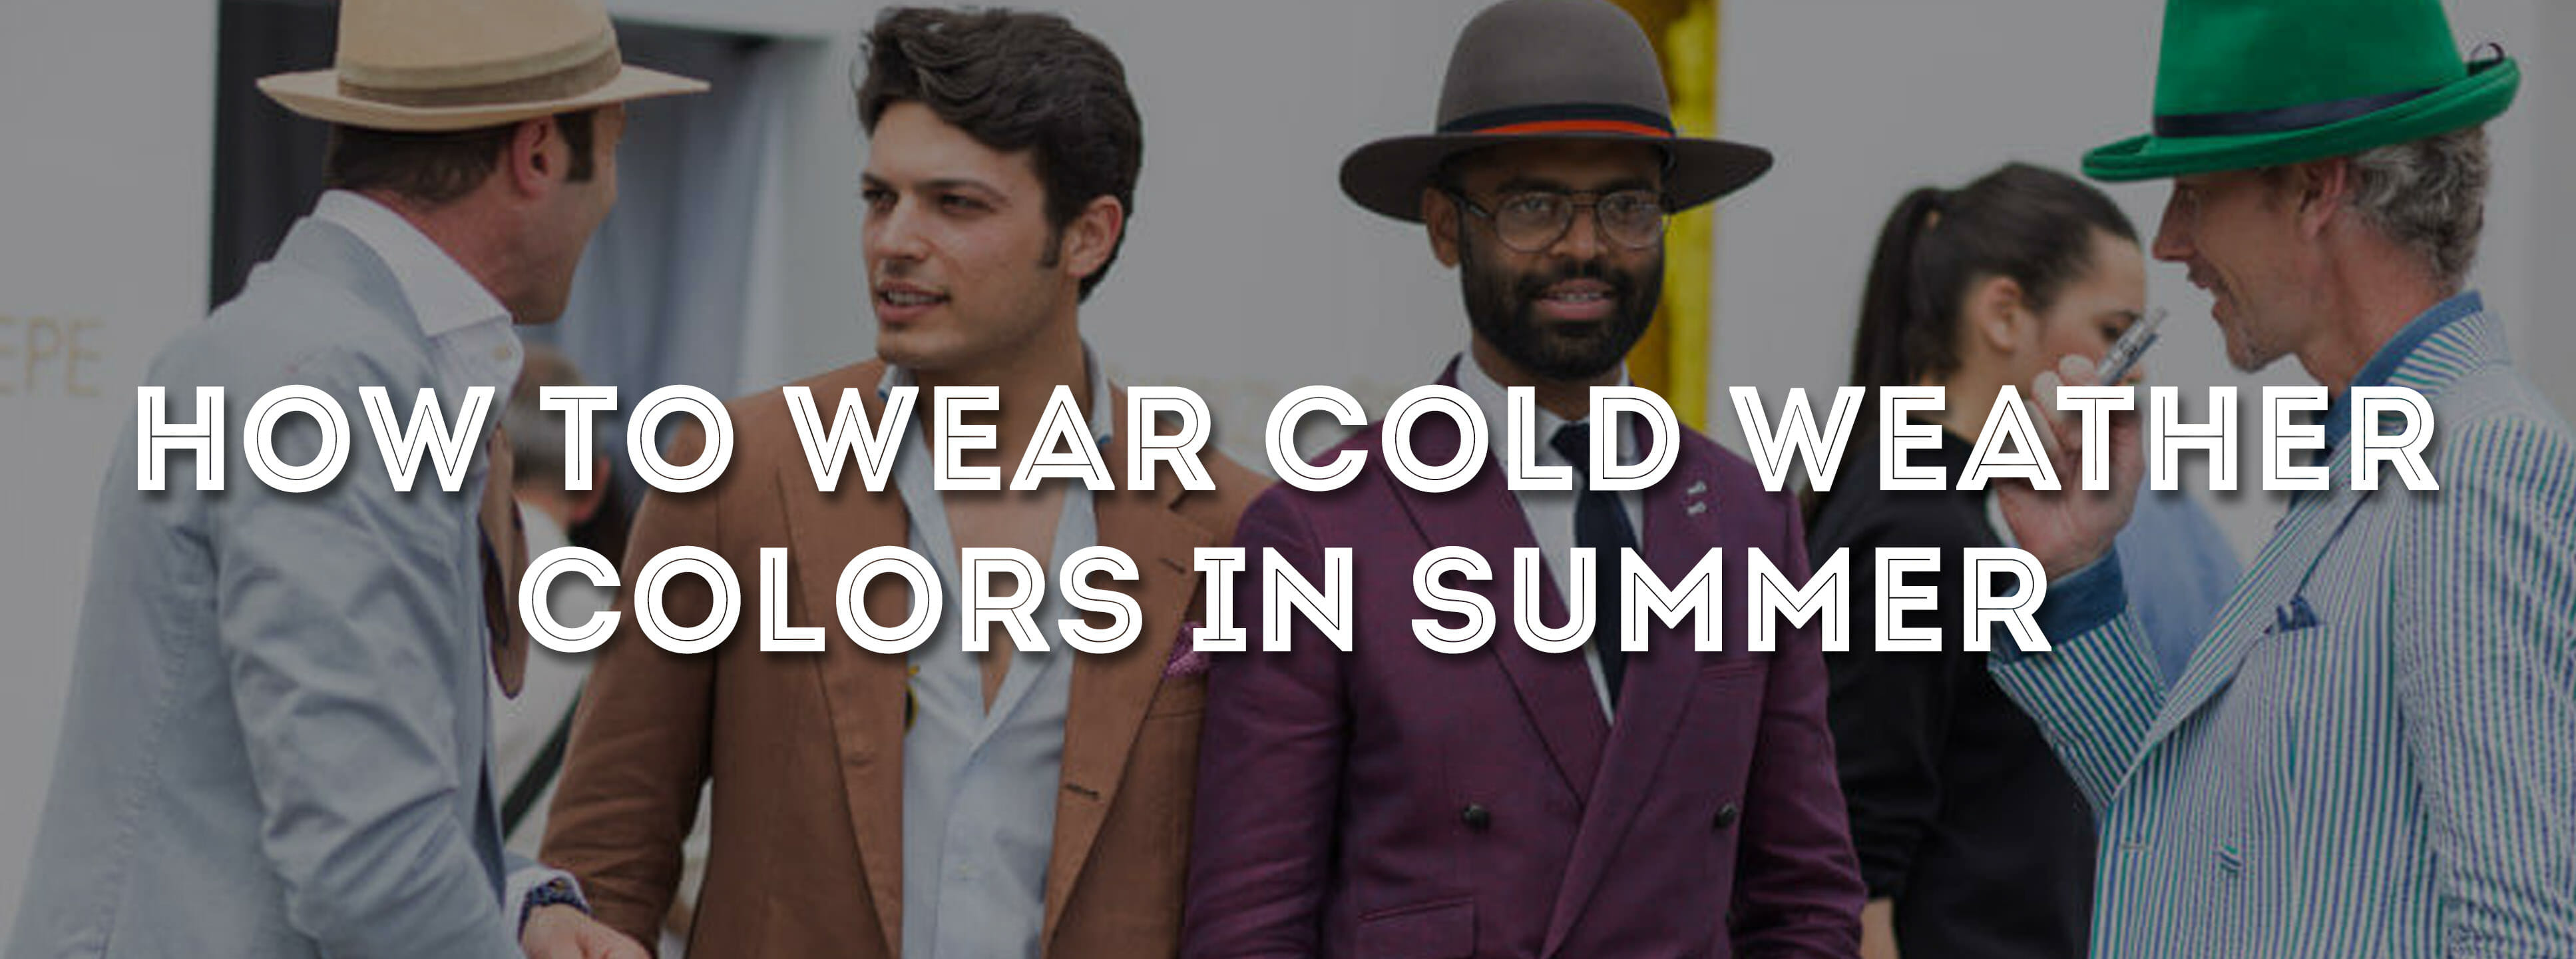 how to wear cold weather colors in summer